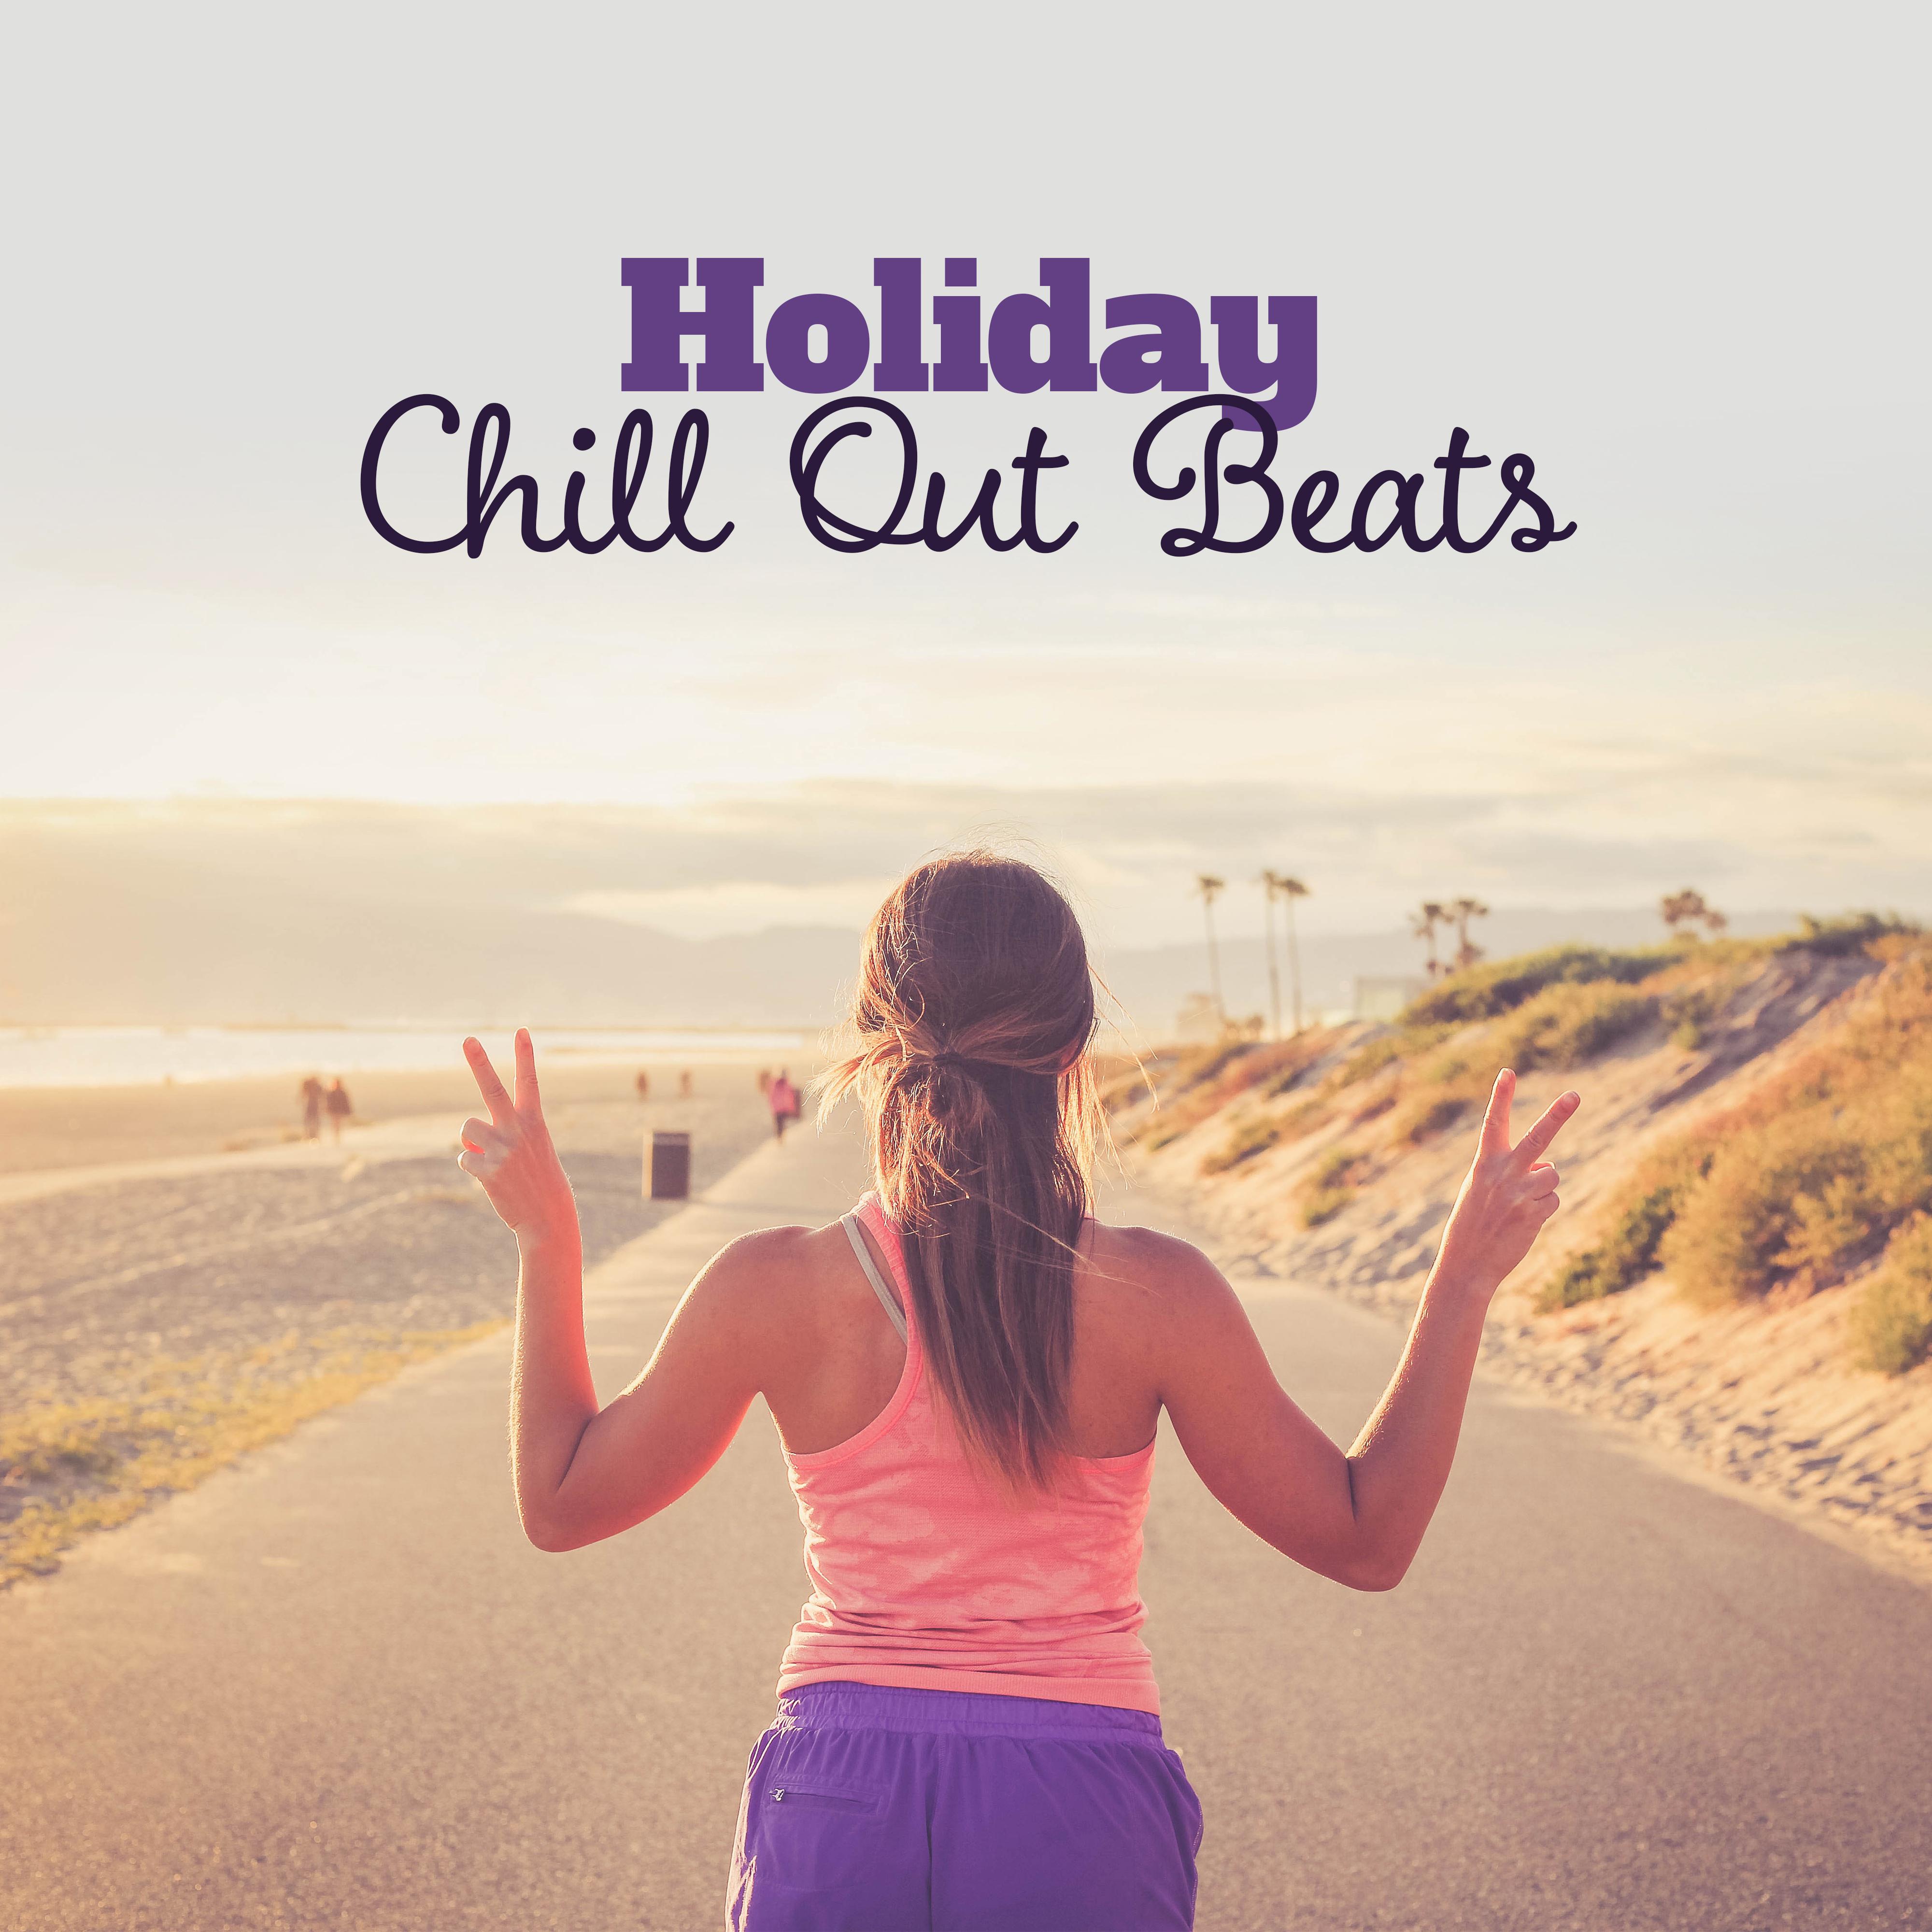 Holiday Chill Out Beats – Summer Sounds, Chilled Songs, Easy Listening, Stress Relief